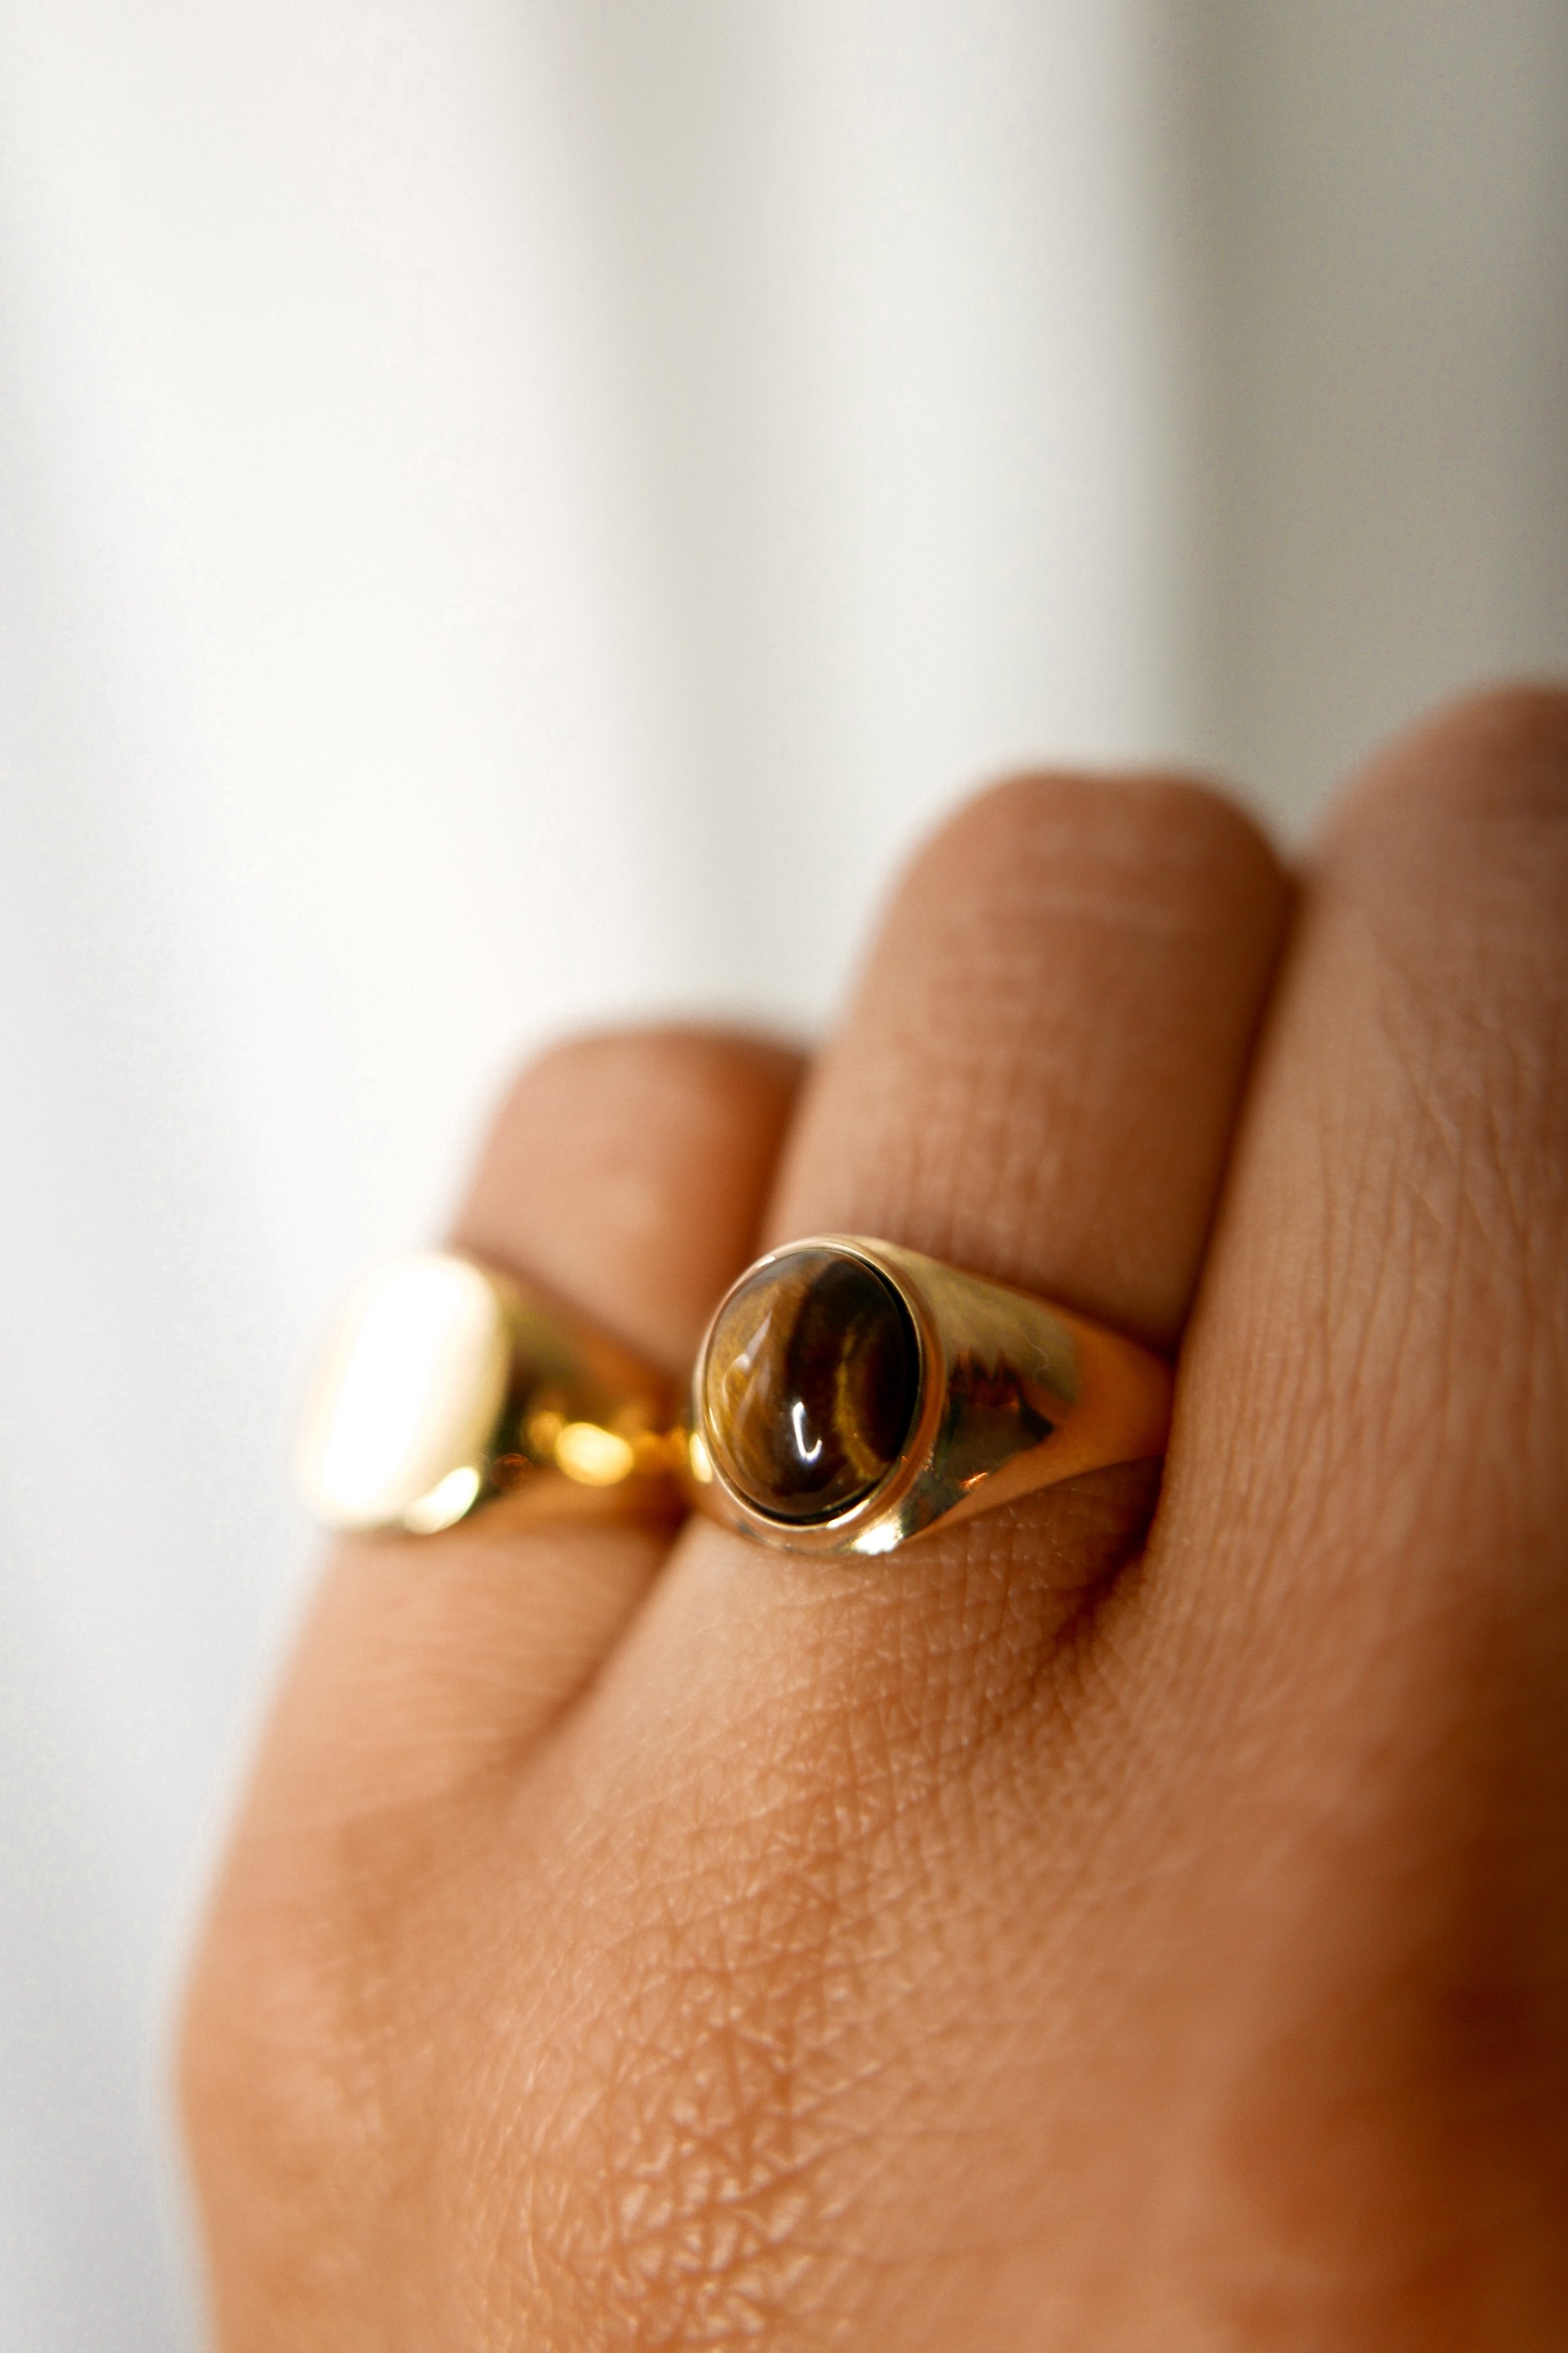 Brooke Ring - Boutique Minimaliste has waterproof, durable, elegant and vintage inspired jewelry